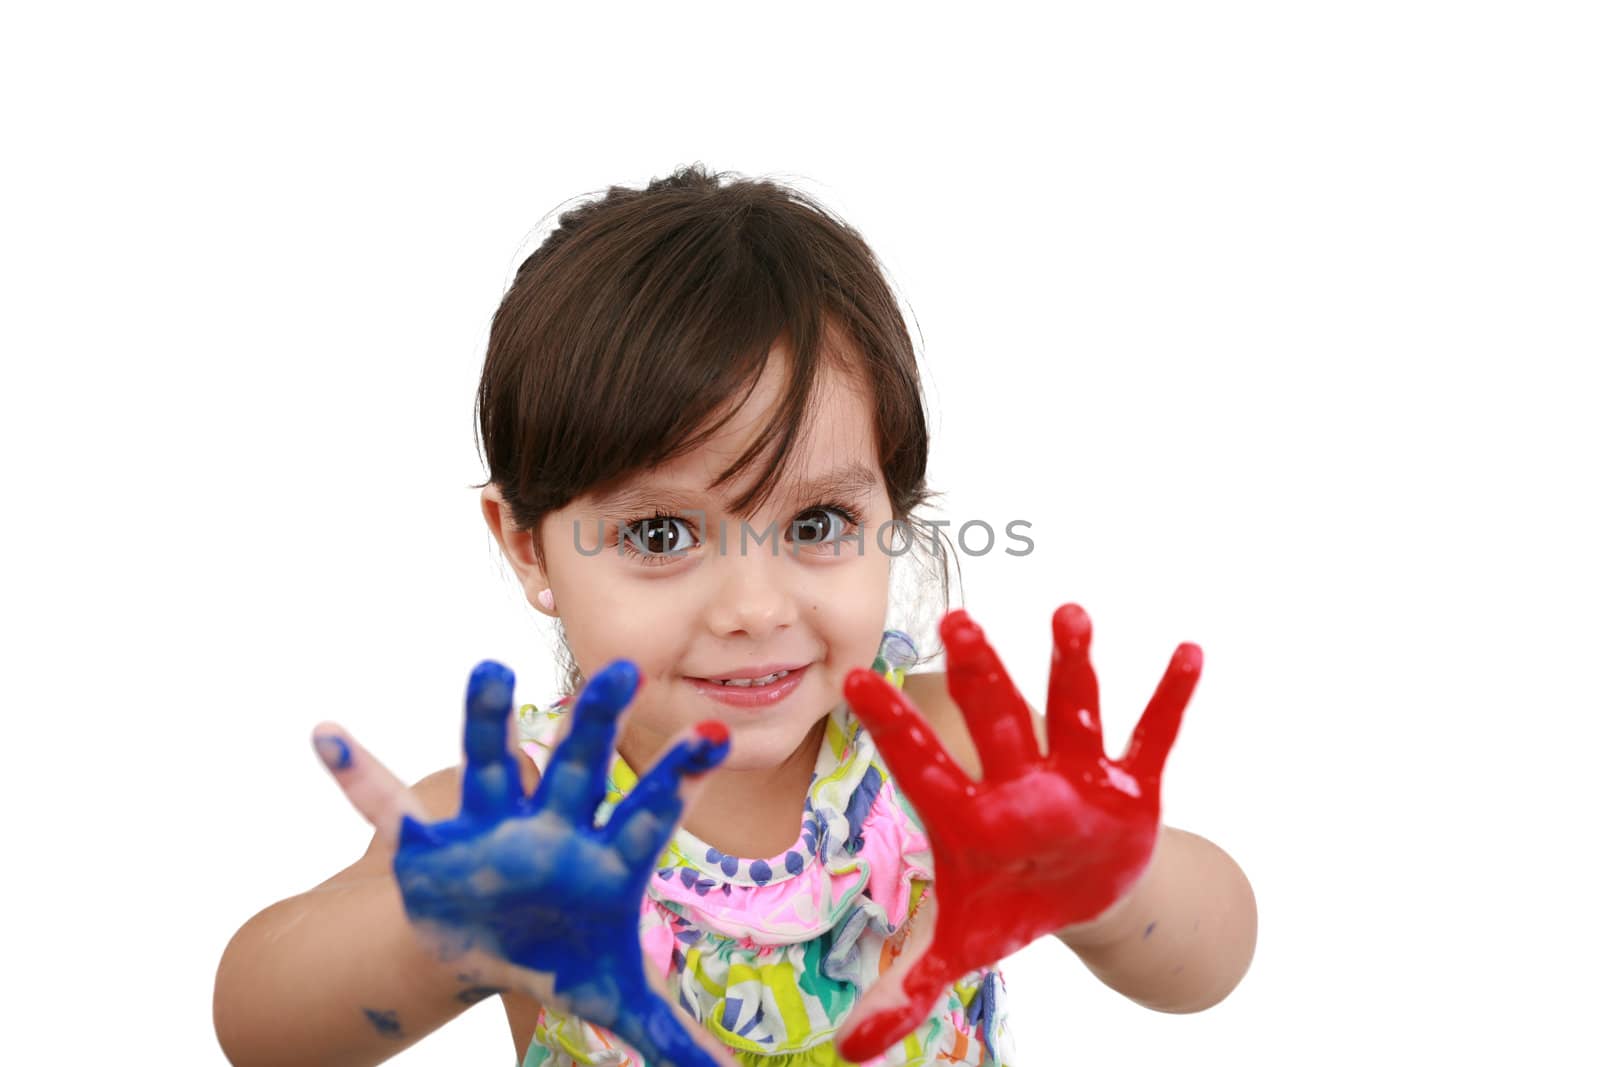 Cute little girl with painted hands. Isolated on white background.